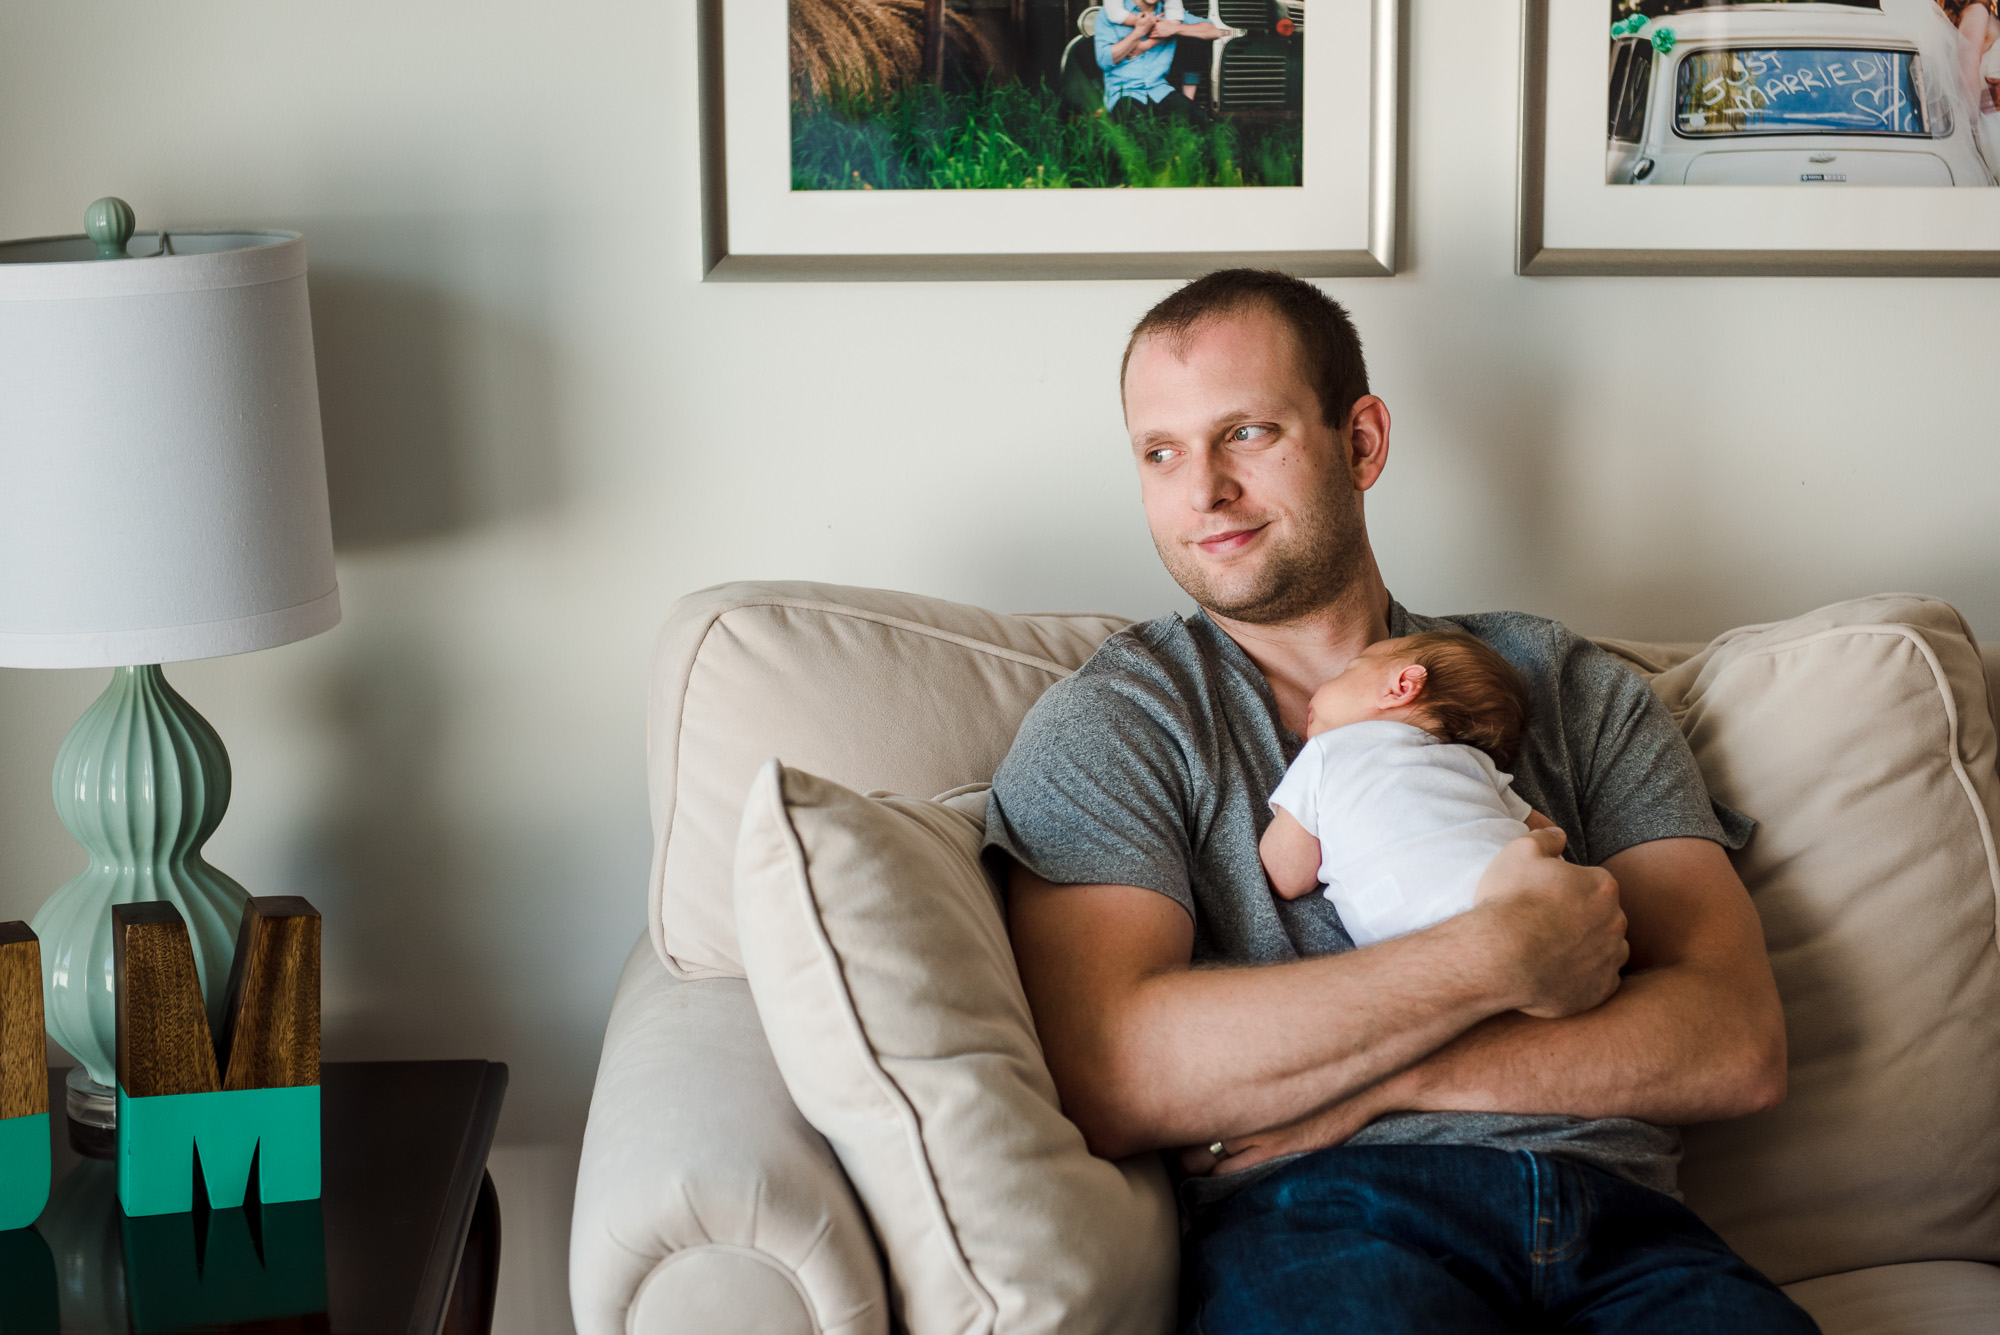 A dad sits and looks out a window with his newborn baby girl